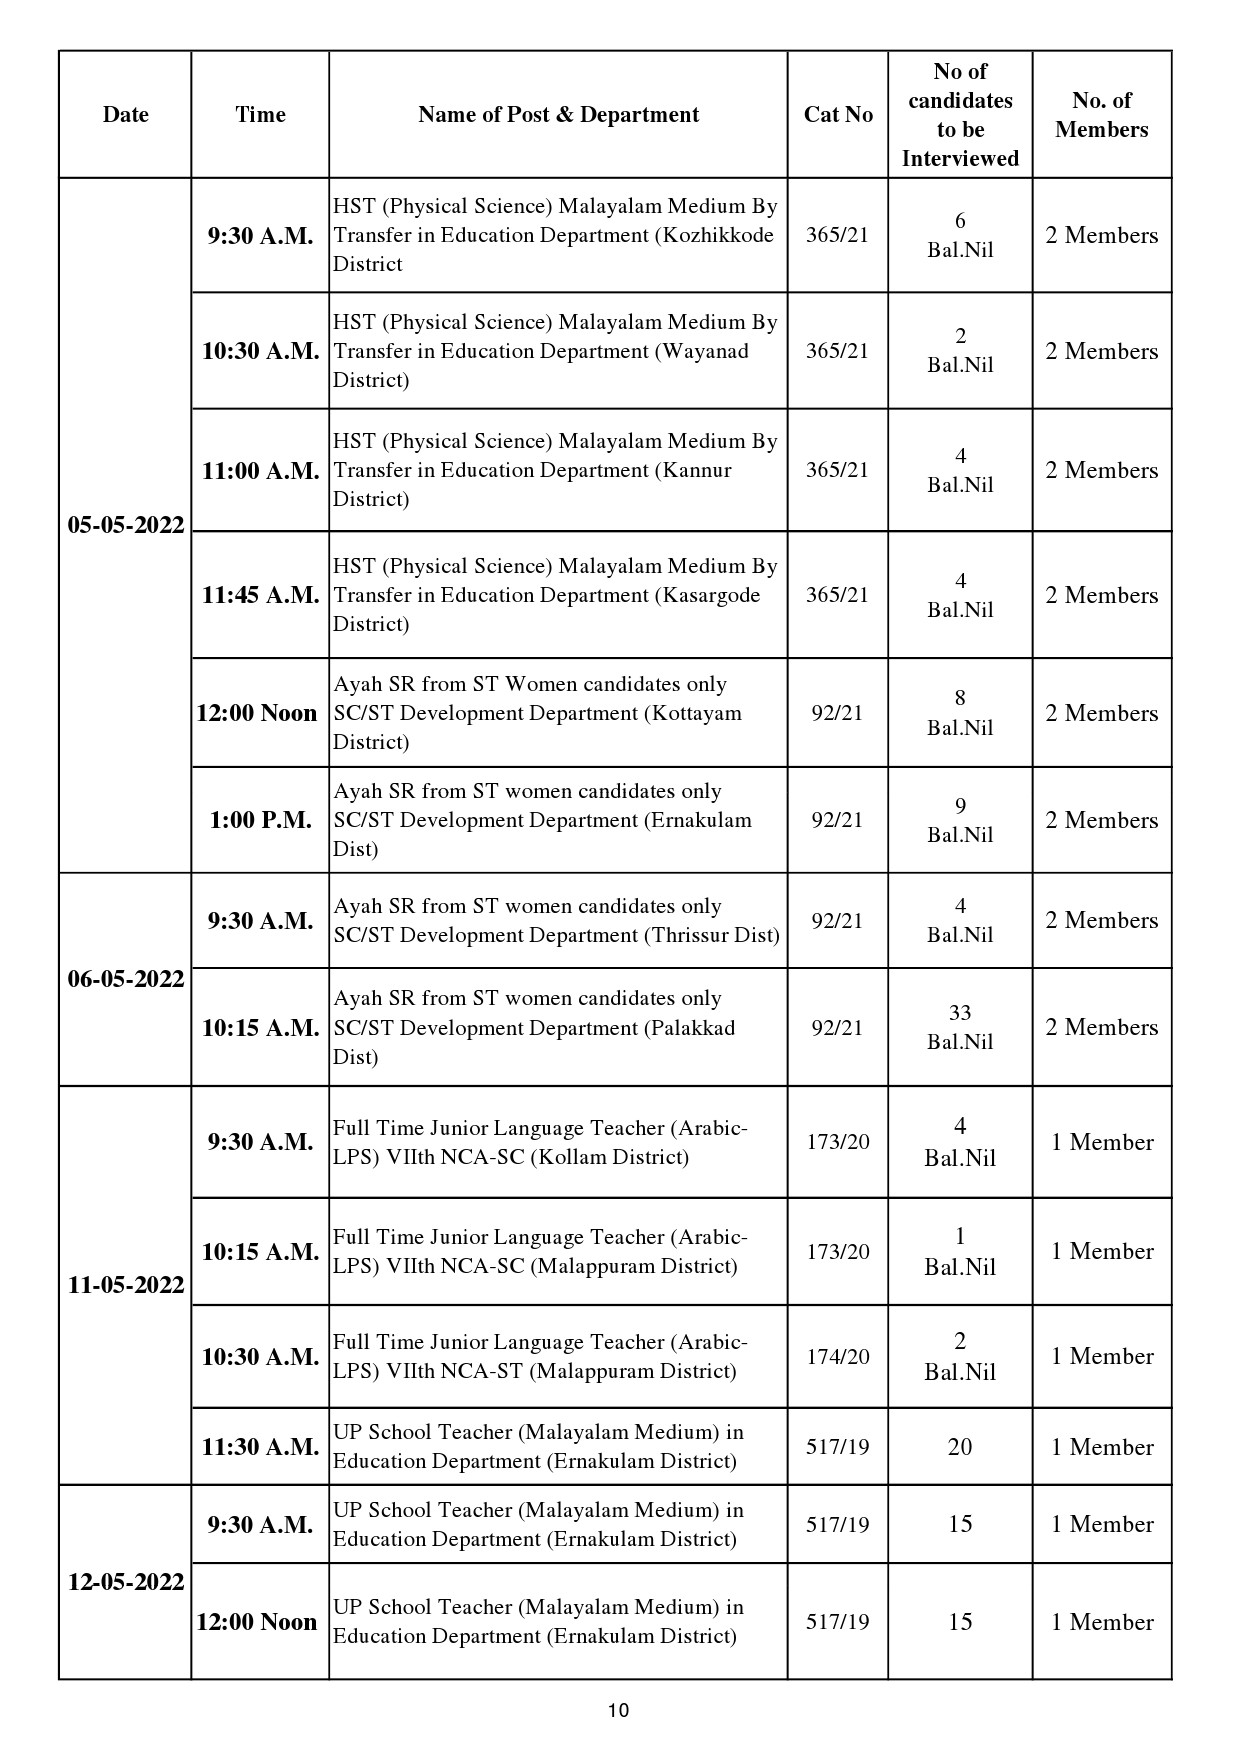 KPSC INTERVIEW PROGRAMME FOR THE MONTH OF MAY 2022 - Notification Image 10